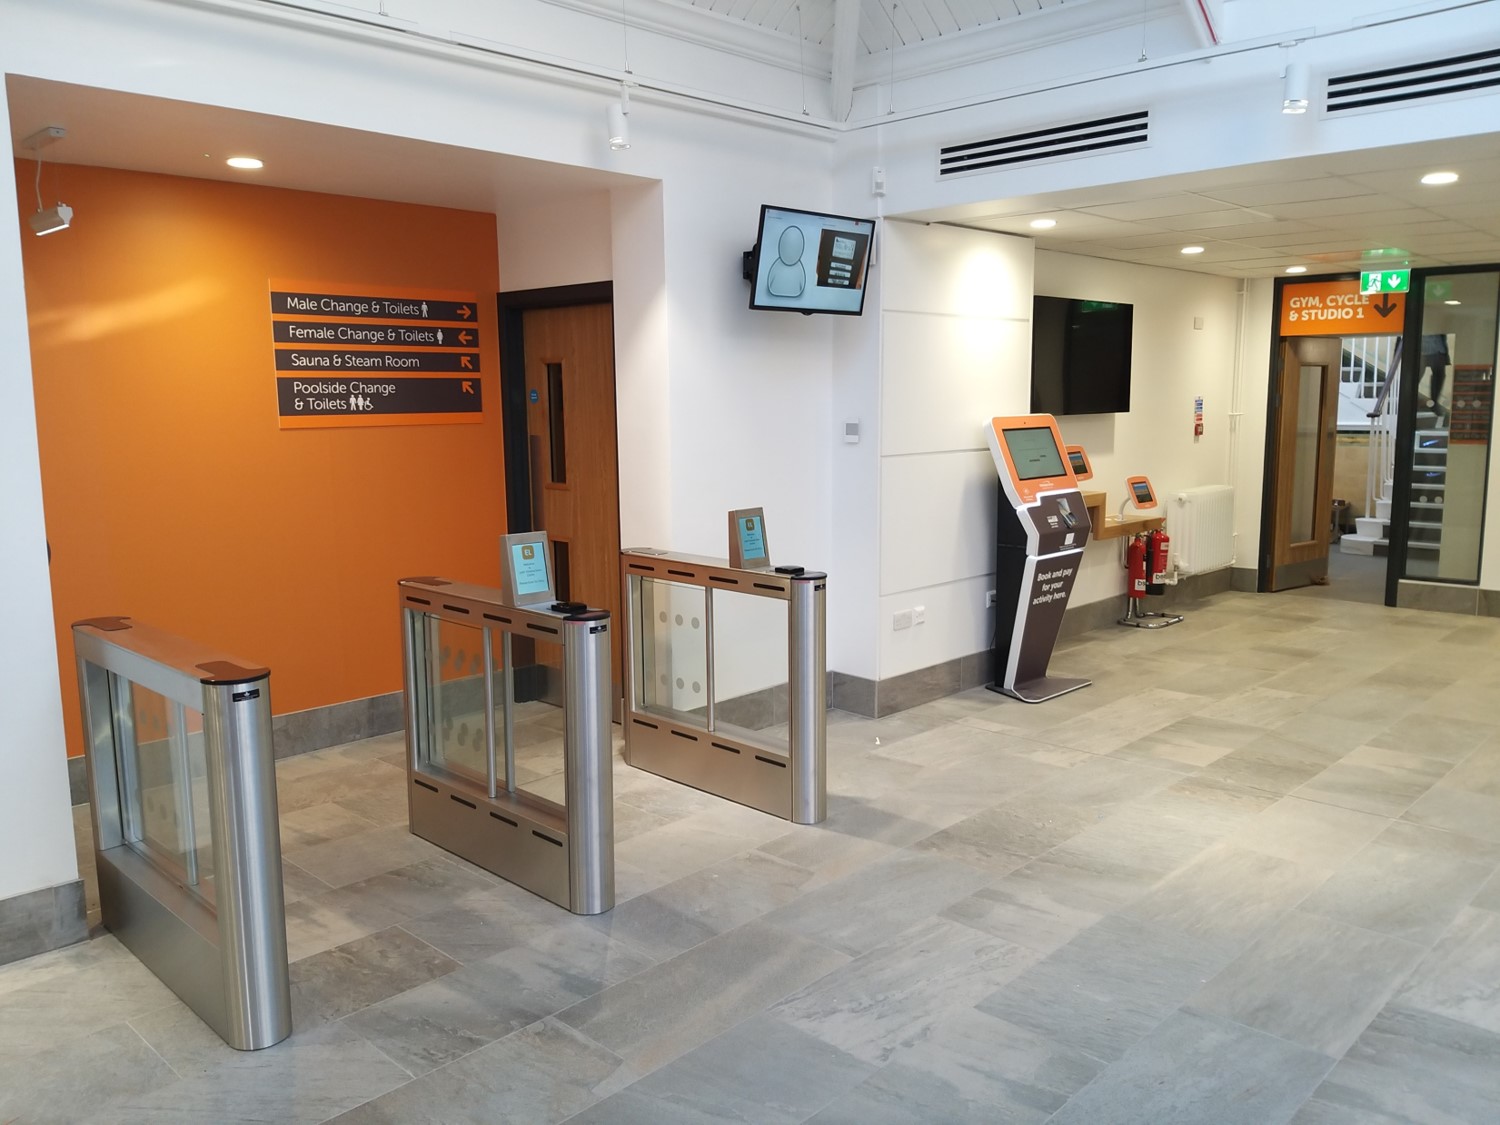 Unmanned Reception area with Kiosk